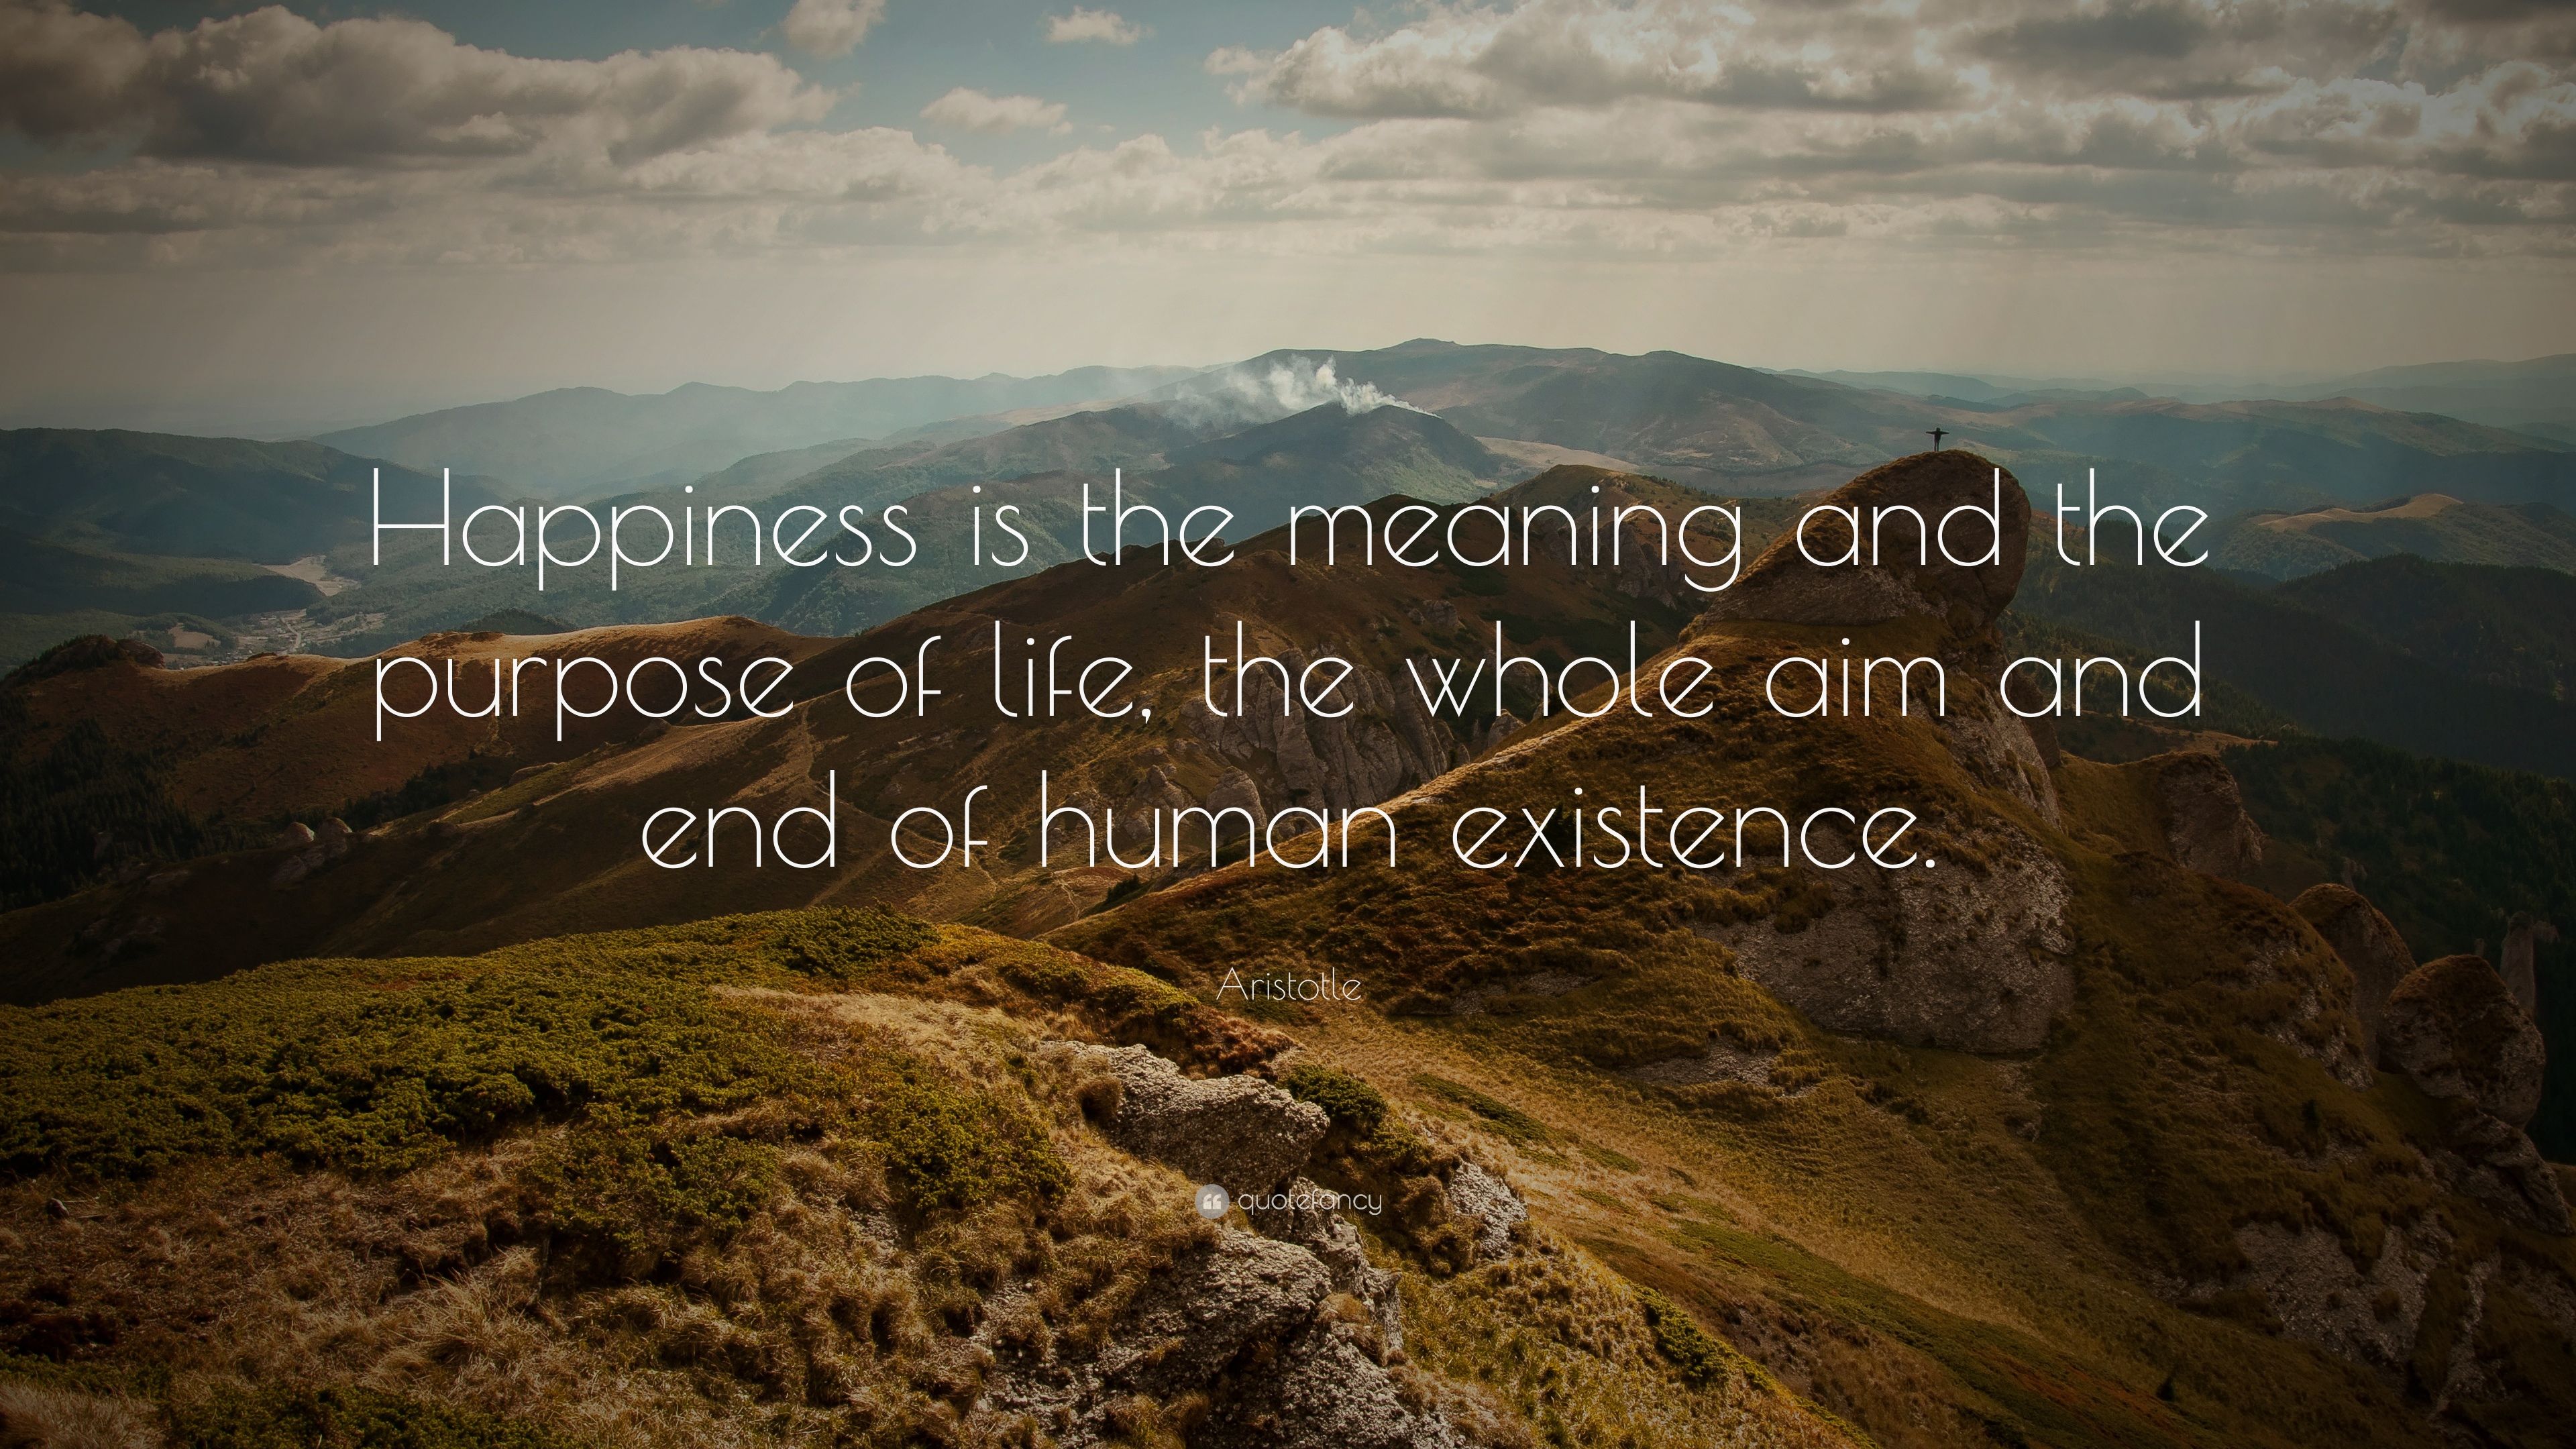 Aristotle Quote: “Happiness is the meaning and the purpose of life